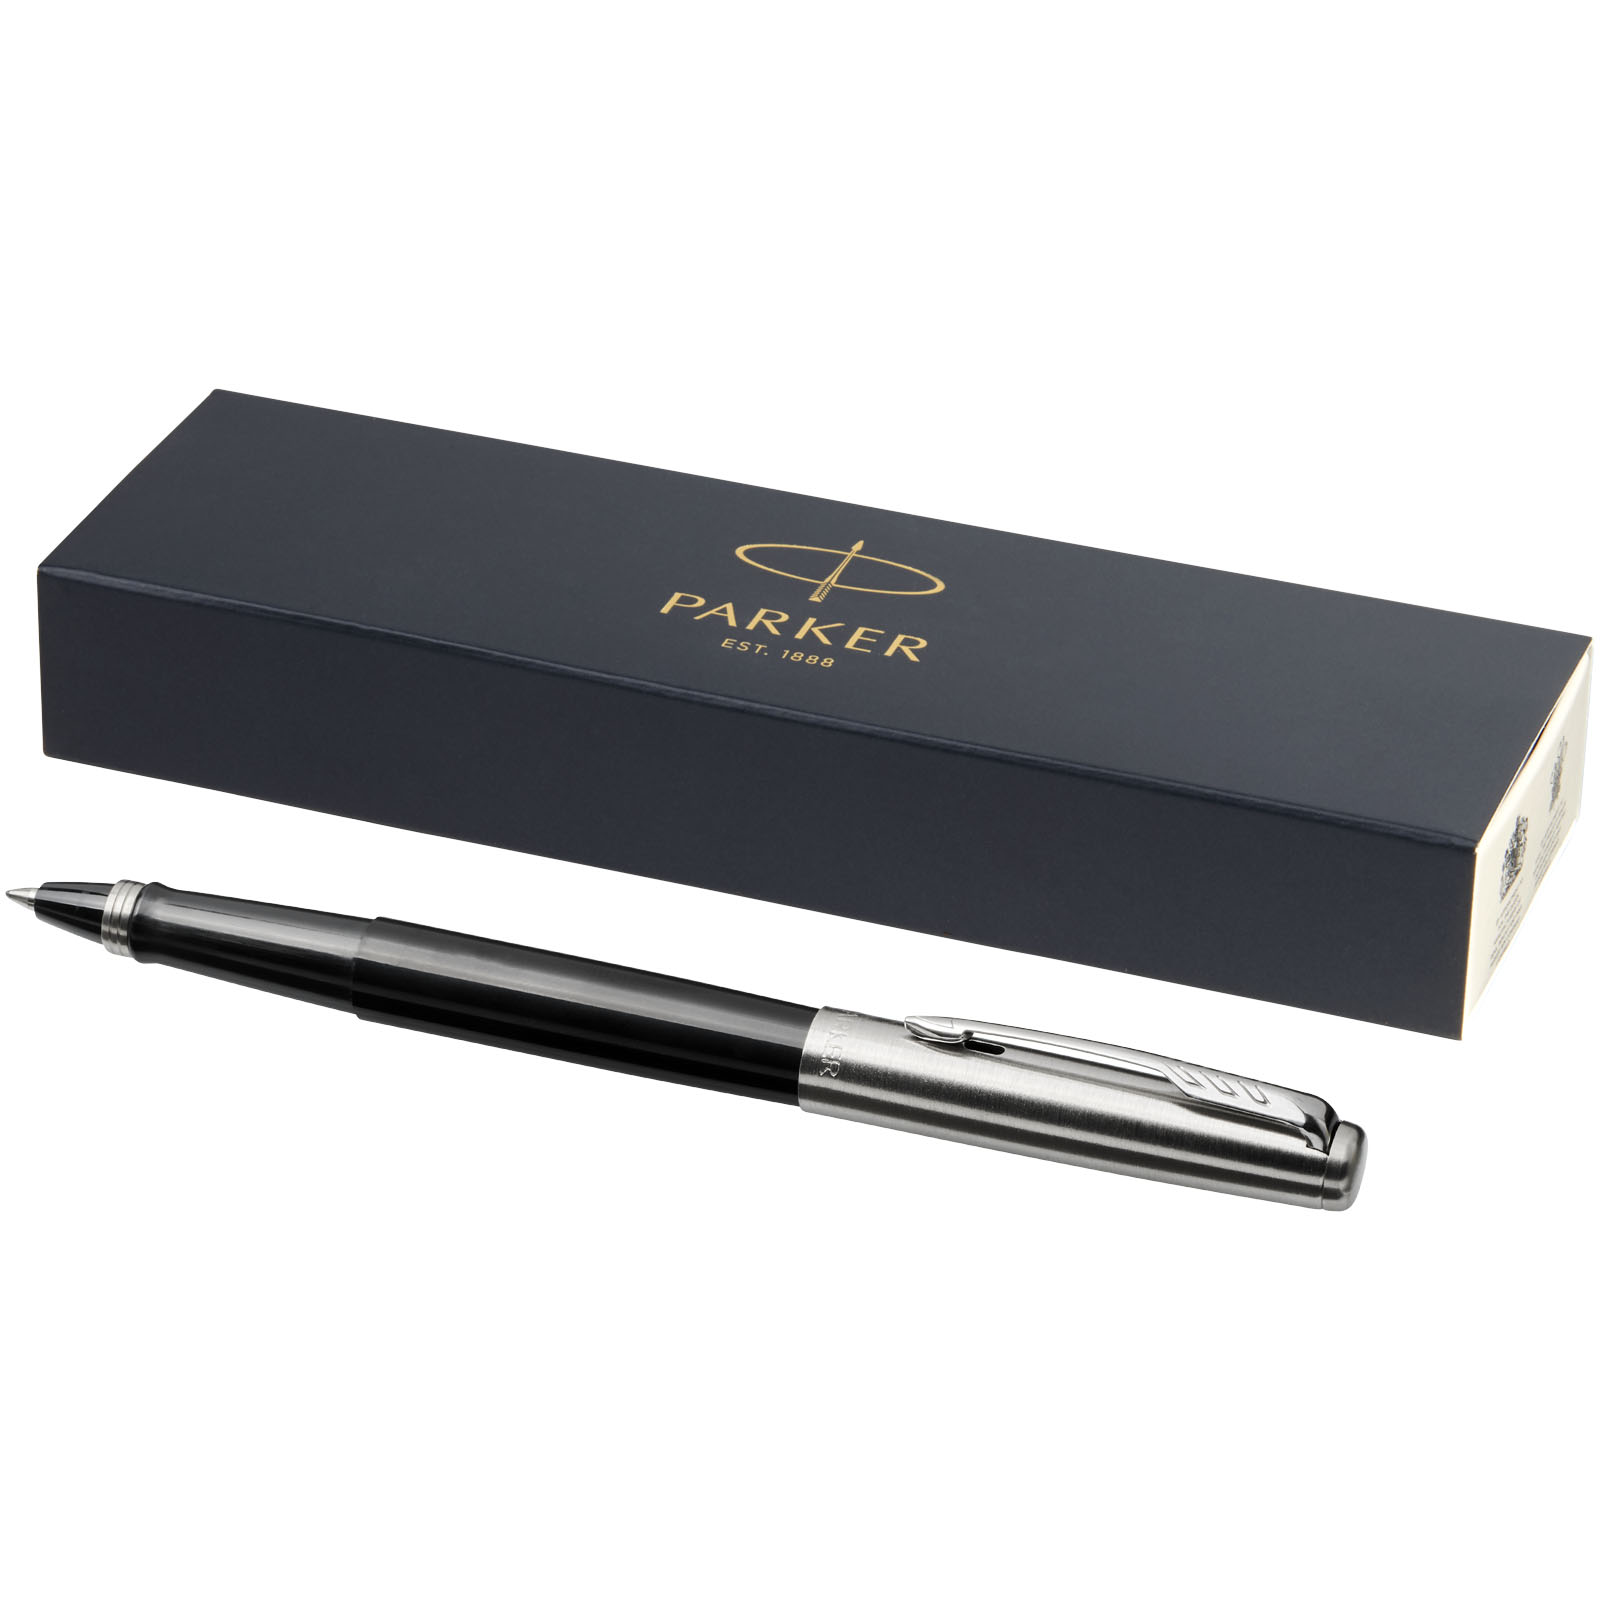 Advertising Rollerball Pens - Parker Jotter plastic with stainless steel rollerball pen